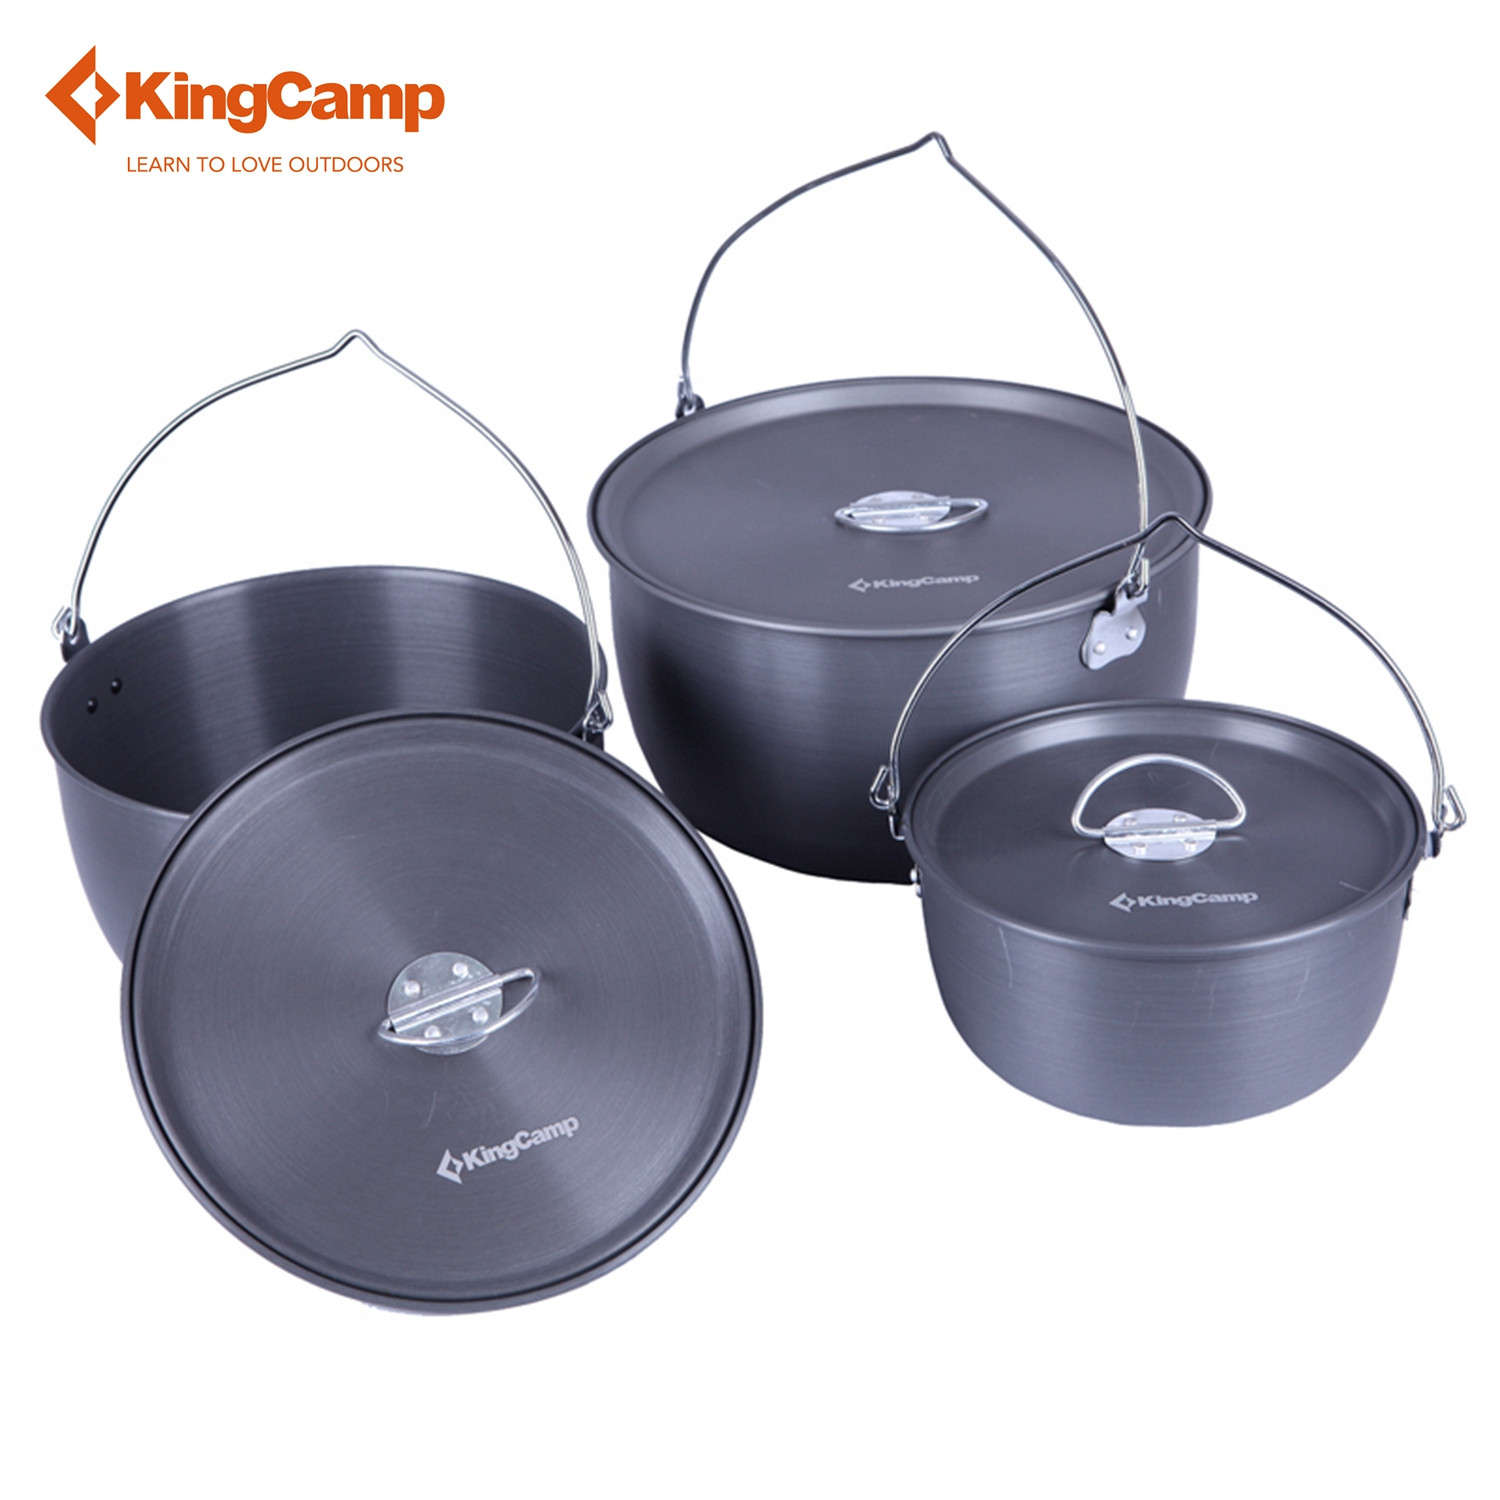 KingCamp Camping Oversized Cookware Hard Anodized Aluminum Non Stick Lightweight Portable Cooking Set For 6-8 People